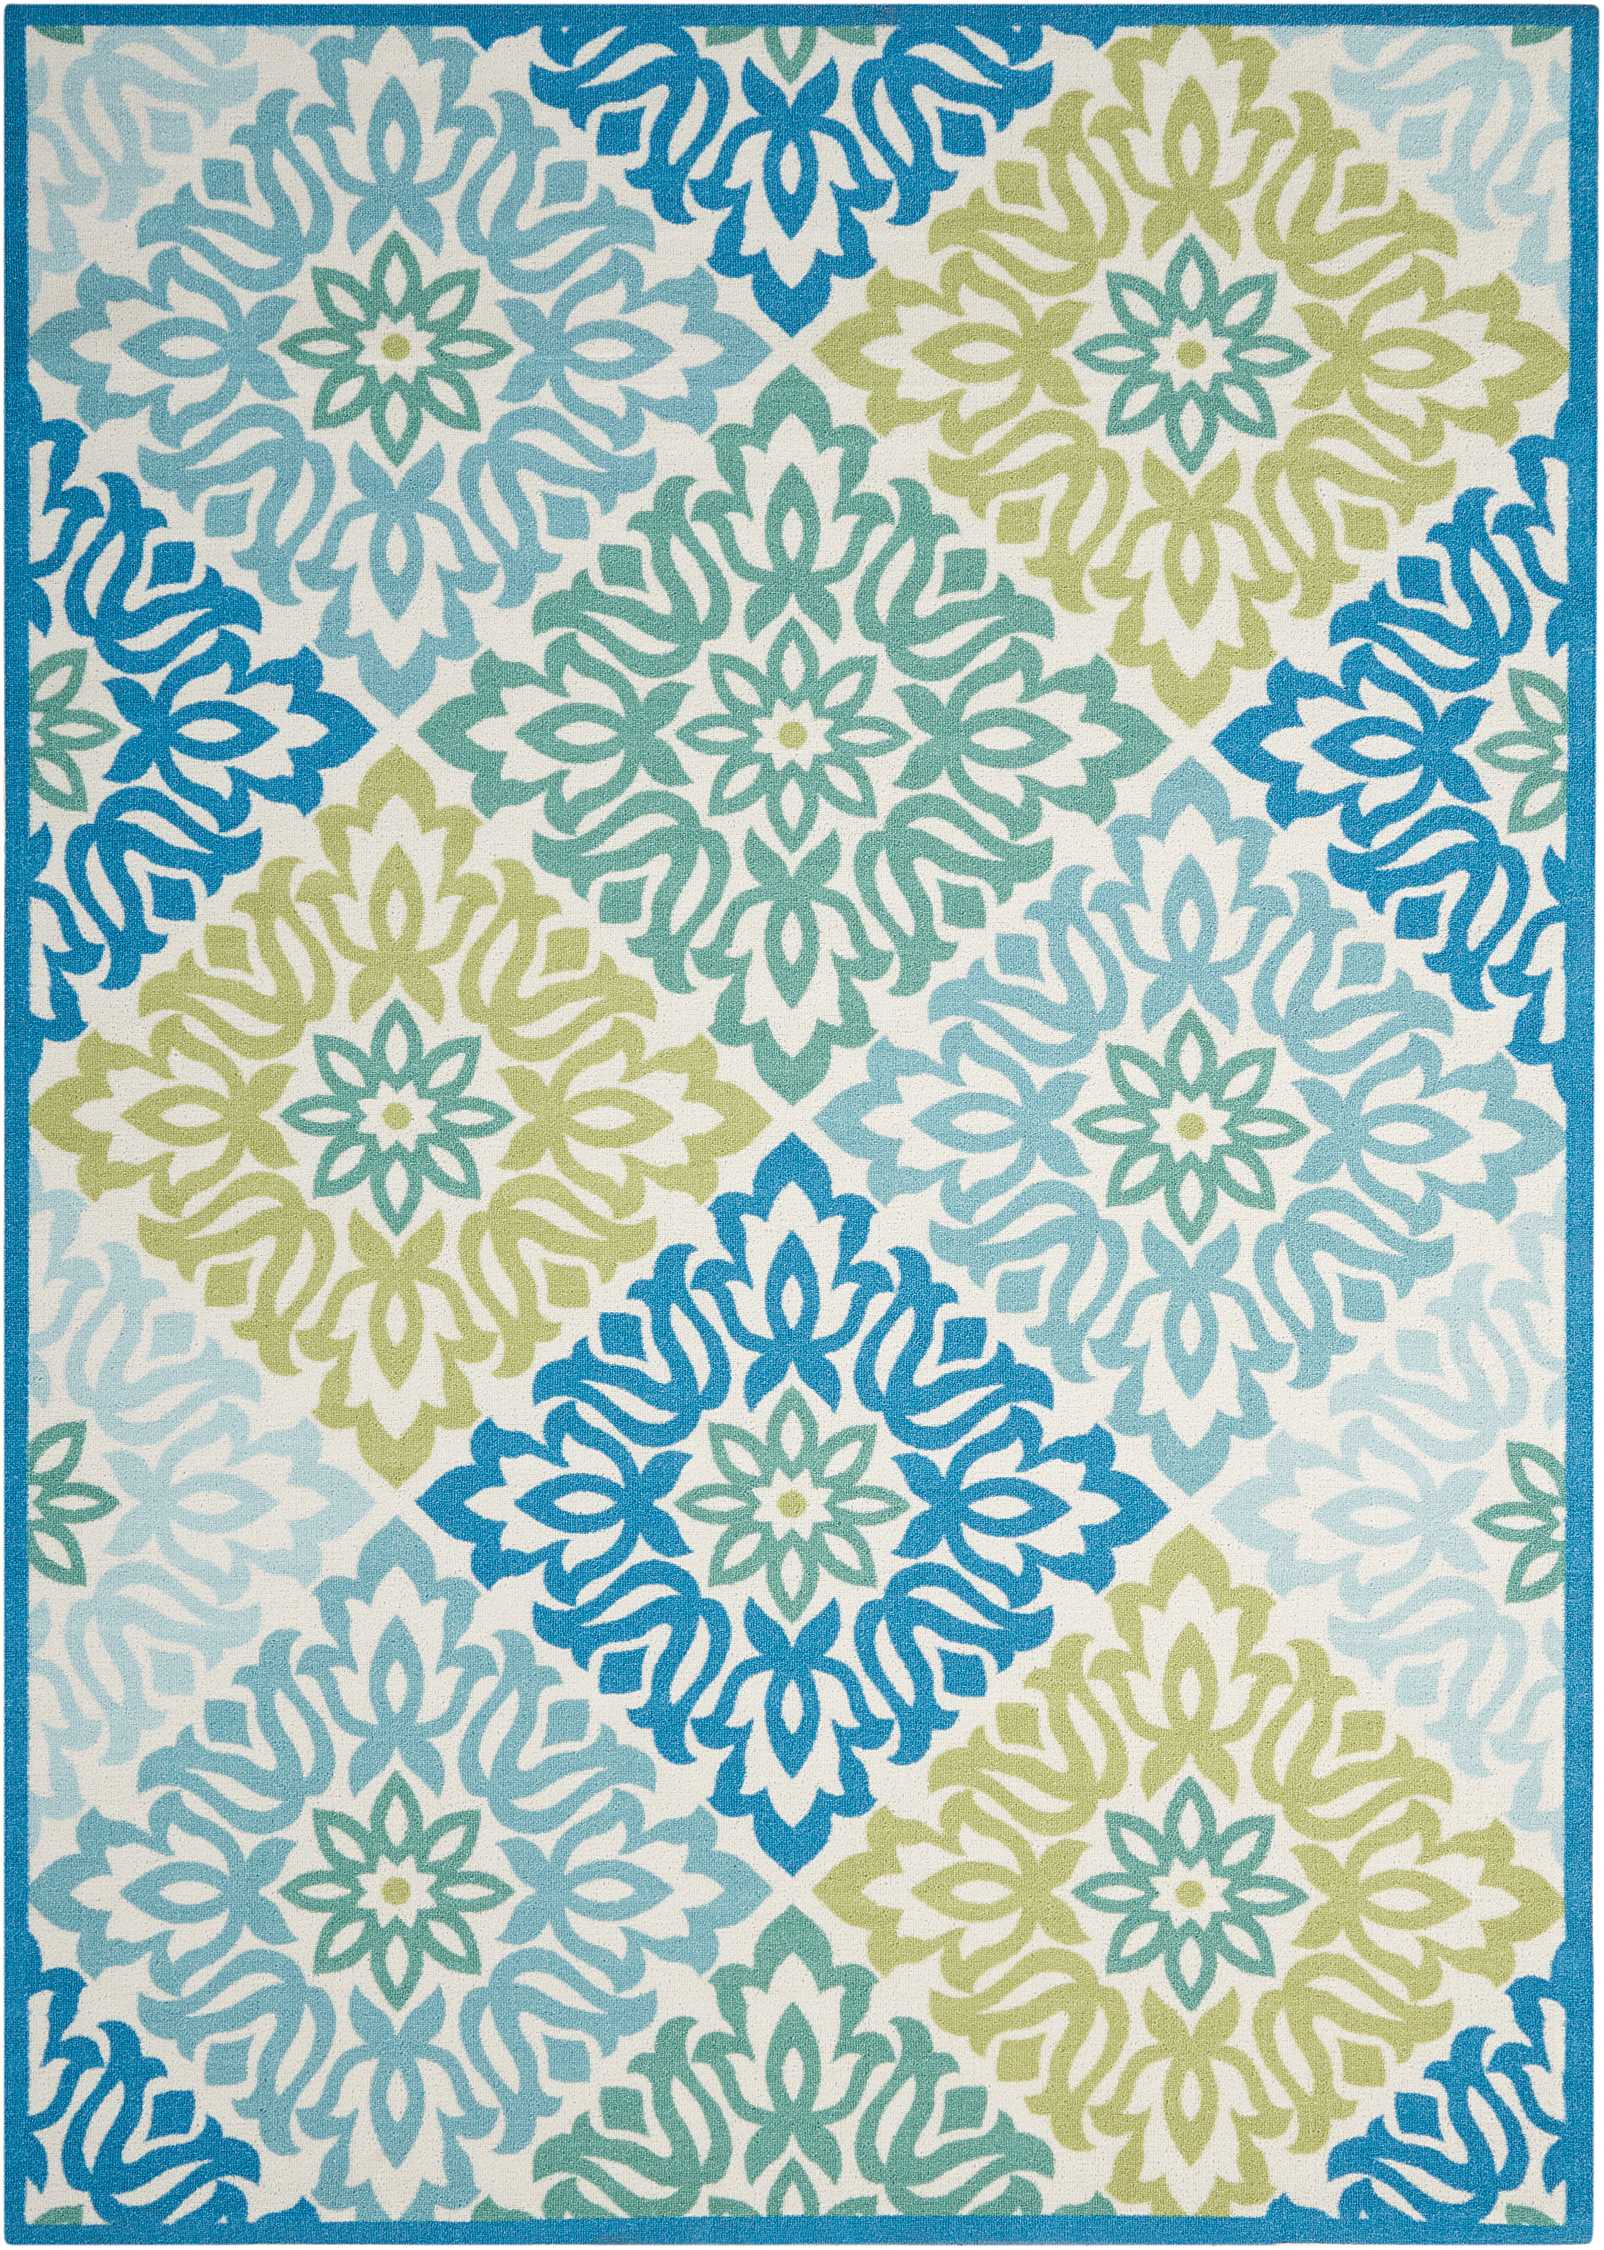 Waverly Sun & Shade Sweet Things Marine Indoor/Outdoor Area Rug by Nourison